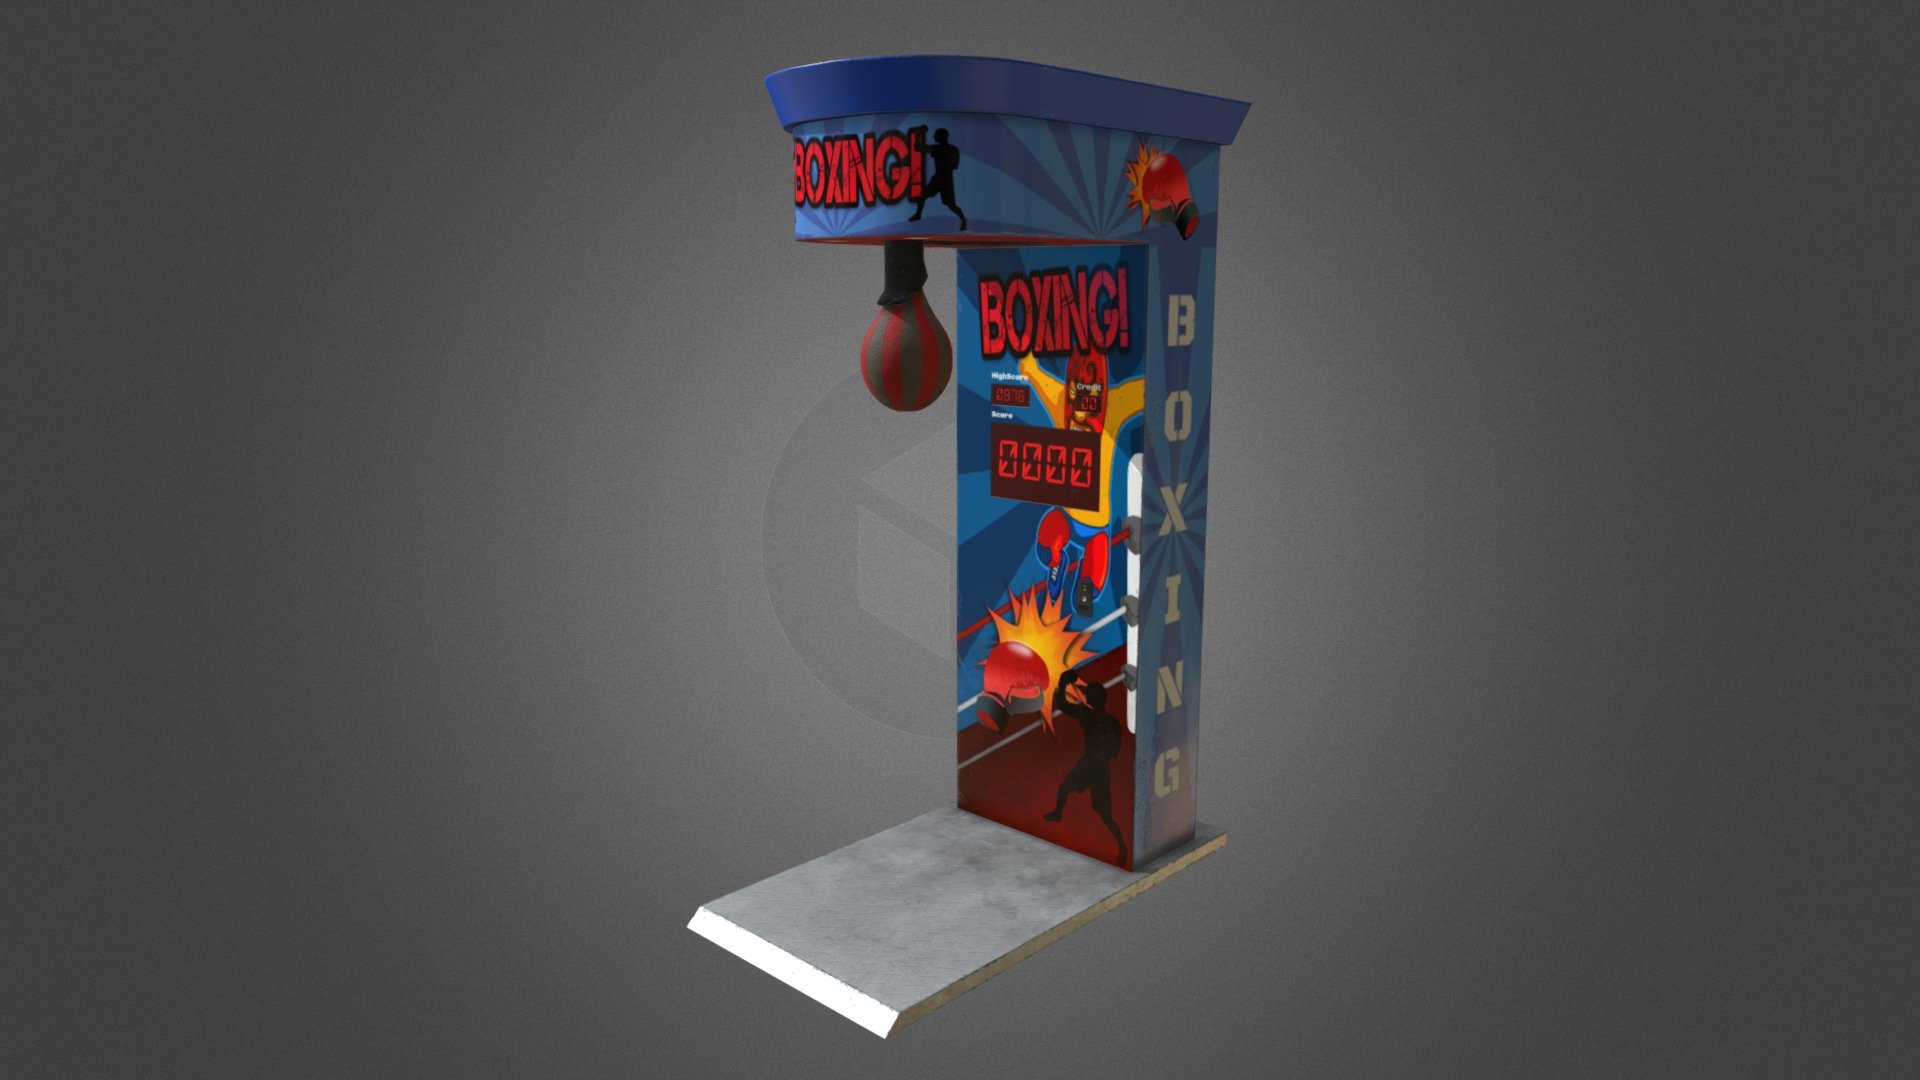 Realistic Game-Ready Boxing Arcade Machine 

Low Poly Count:
Arcade Machine - 2644  Faces, 2706 Vertices

Overview:




Complete PBR Texture Maps (Basecolor, Roughness, Metallic, Ambient Occlusion, Height, Emissive, Opacity, and Normal Map). 

Textures in PNG Format .

No Plugins Needed.

Organized Objects and Textures.

Fully unwrapped UVs, Non-overlapping UV-islands. Efficient use of the UV space.

Available in 10 Formats: Blend, FBX, OBJ, glb, glTF, Dae, Stl, Ply, 3ds, x3d (The different formats are available in the RAR File attached).

Real-Life Dimensions in cm.

Ready for Subdivision.

Suitable for Game Design and Real-Time Rendering with a low poly count that preserves realism.
Feel free to contact me via private messages if you have any questions or need assistance!!
 - Boxing Arcade Machine - Retro Game Ready LowPoly - Buy Royalty Free 3D model by Abdelrahman Ahmed (@AbdelrahmanAhmed) 3d model